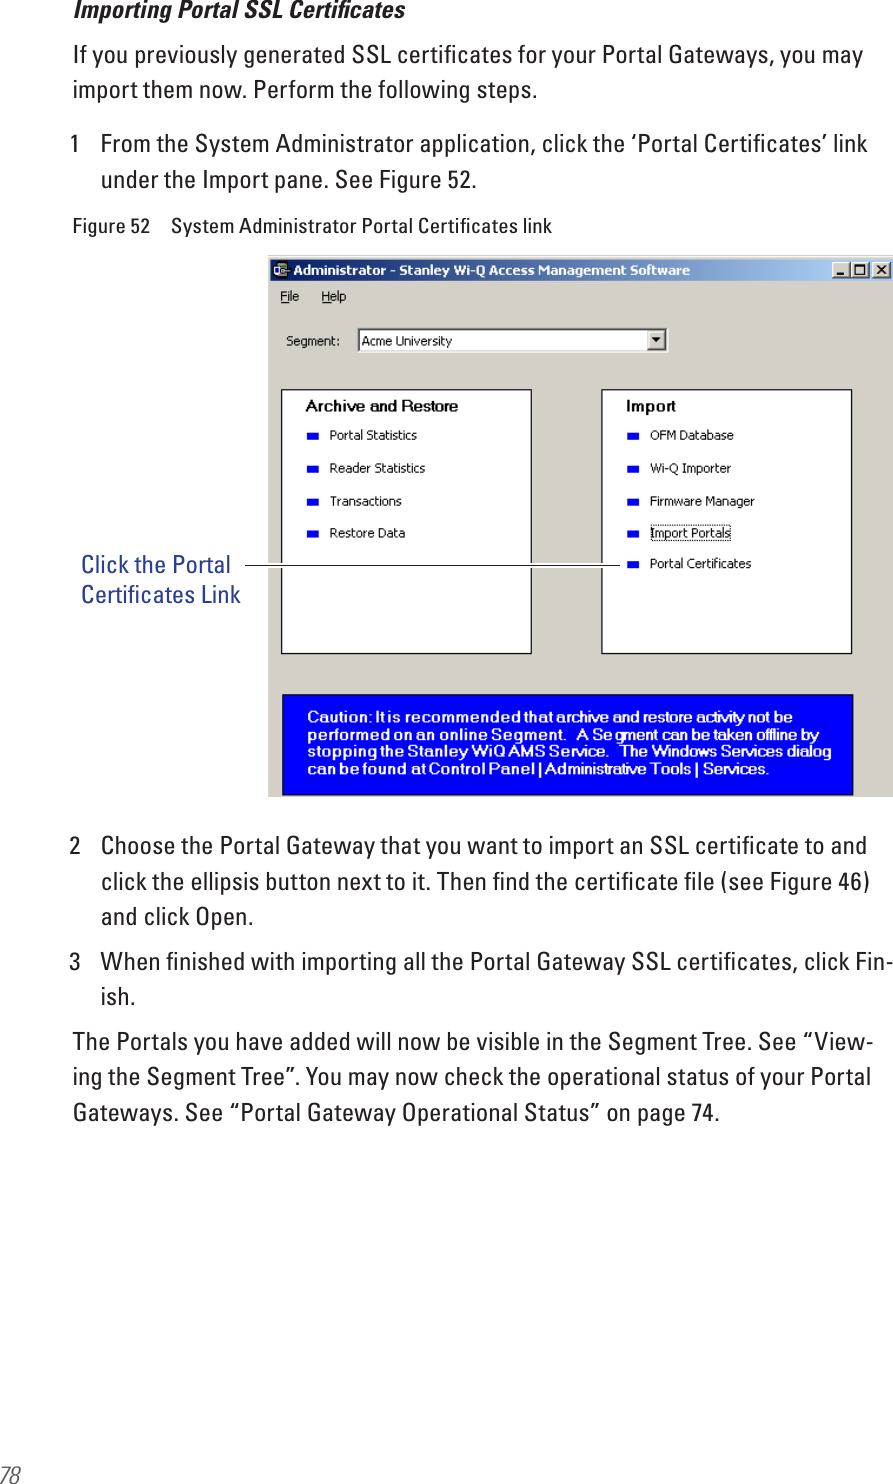 78Importing Portal SSL Certiﬁcates If you previously generated SSL certiﬁcates for your Portal Gateways, you may import them now. Perform the following steps.1  From the System Administrator application, click the ‘Portal Certiﬁcates’ link under the Import pane. See Figure 52.Figure 52  System Administrator Portal Certiﬁcates link2  Choose the Portal Gateway that you want to import an SSL certiﬁcate to and click the ellipsis button next to it. Then ﬁnd the certiﬁcate ﬁle (see Figure 46) and click Open. 3  When ﬁnished with importing all the Portal Gateway SSL certiﬁcates, click Fin-ish.The Portals you have added will now be visible in the Segment Tree. See “View-ing the Segment Tree”. You may now check the operational status of your Portal Gateways. See “Portal Gateway Operational Status” on page 74.Click the PortalCertificates Link